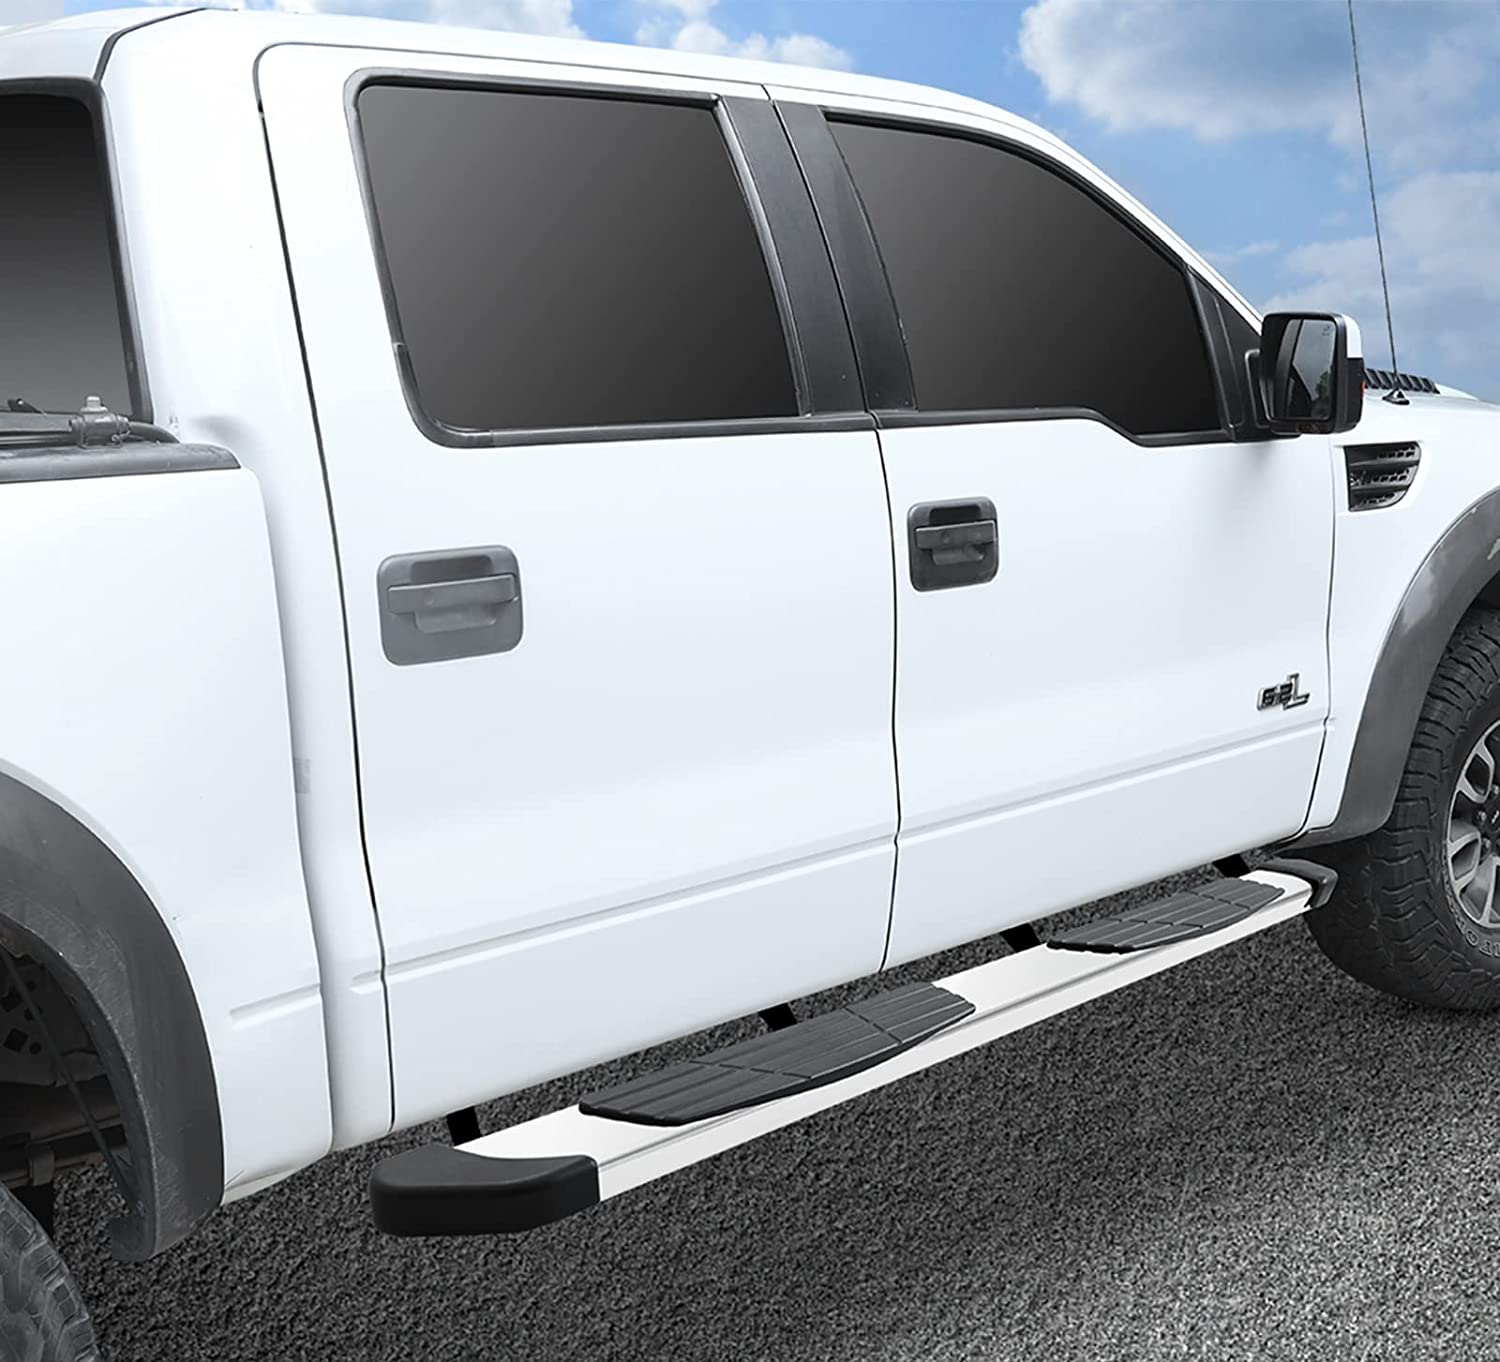 6.5” Running Boards Compatible with 2019-2024 Dodge Ram 1500 Quad Cab with 3/4 Size Rear Door, Stainless Steel Side Steps T6 Style.